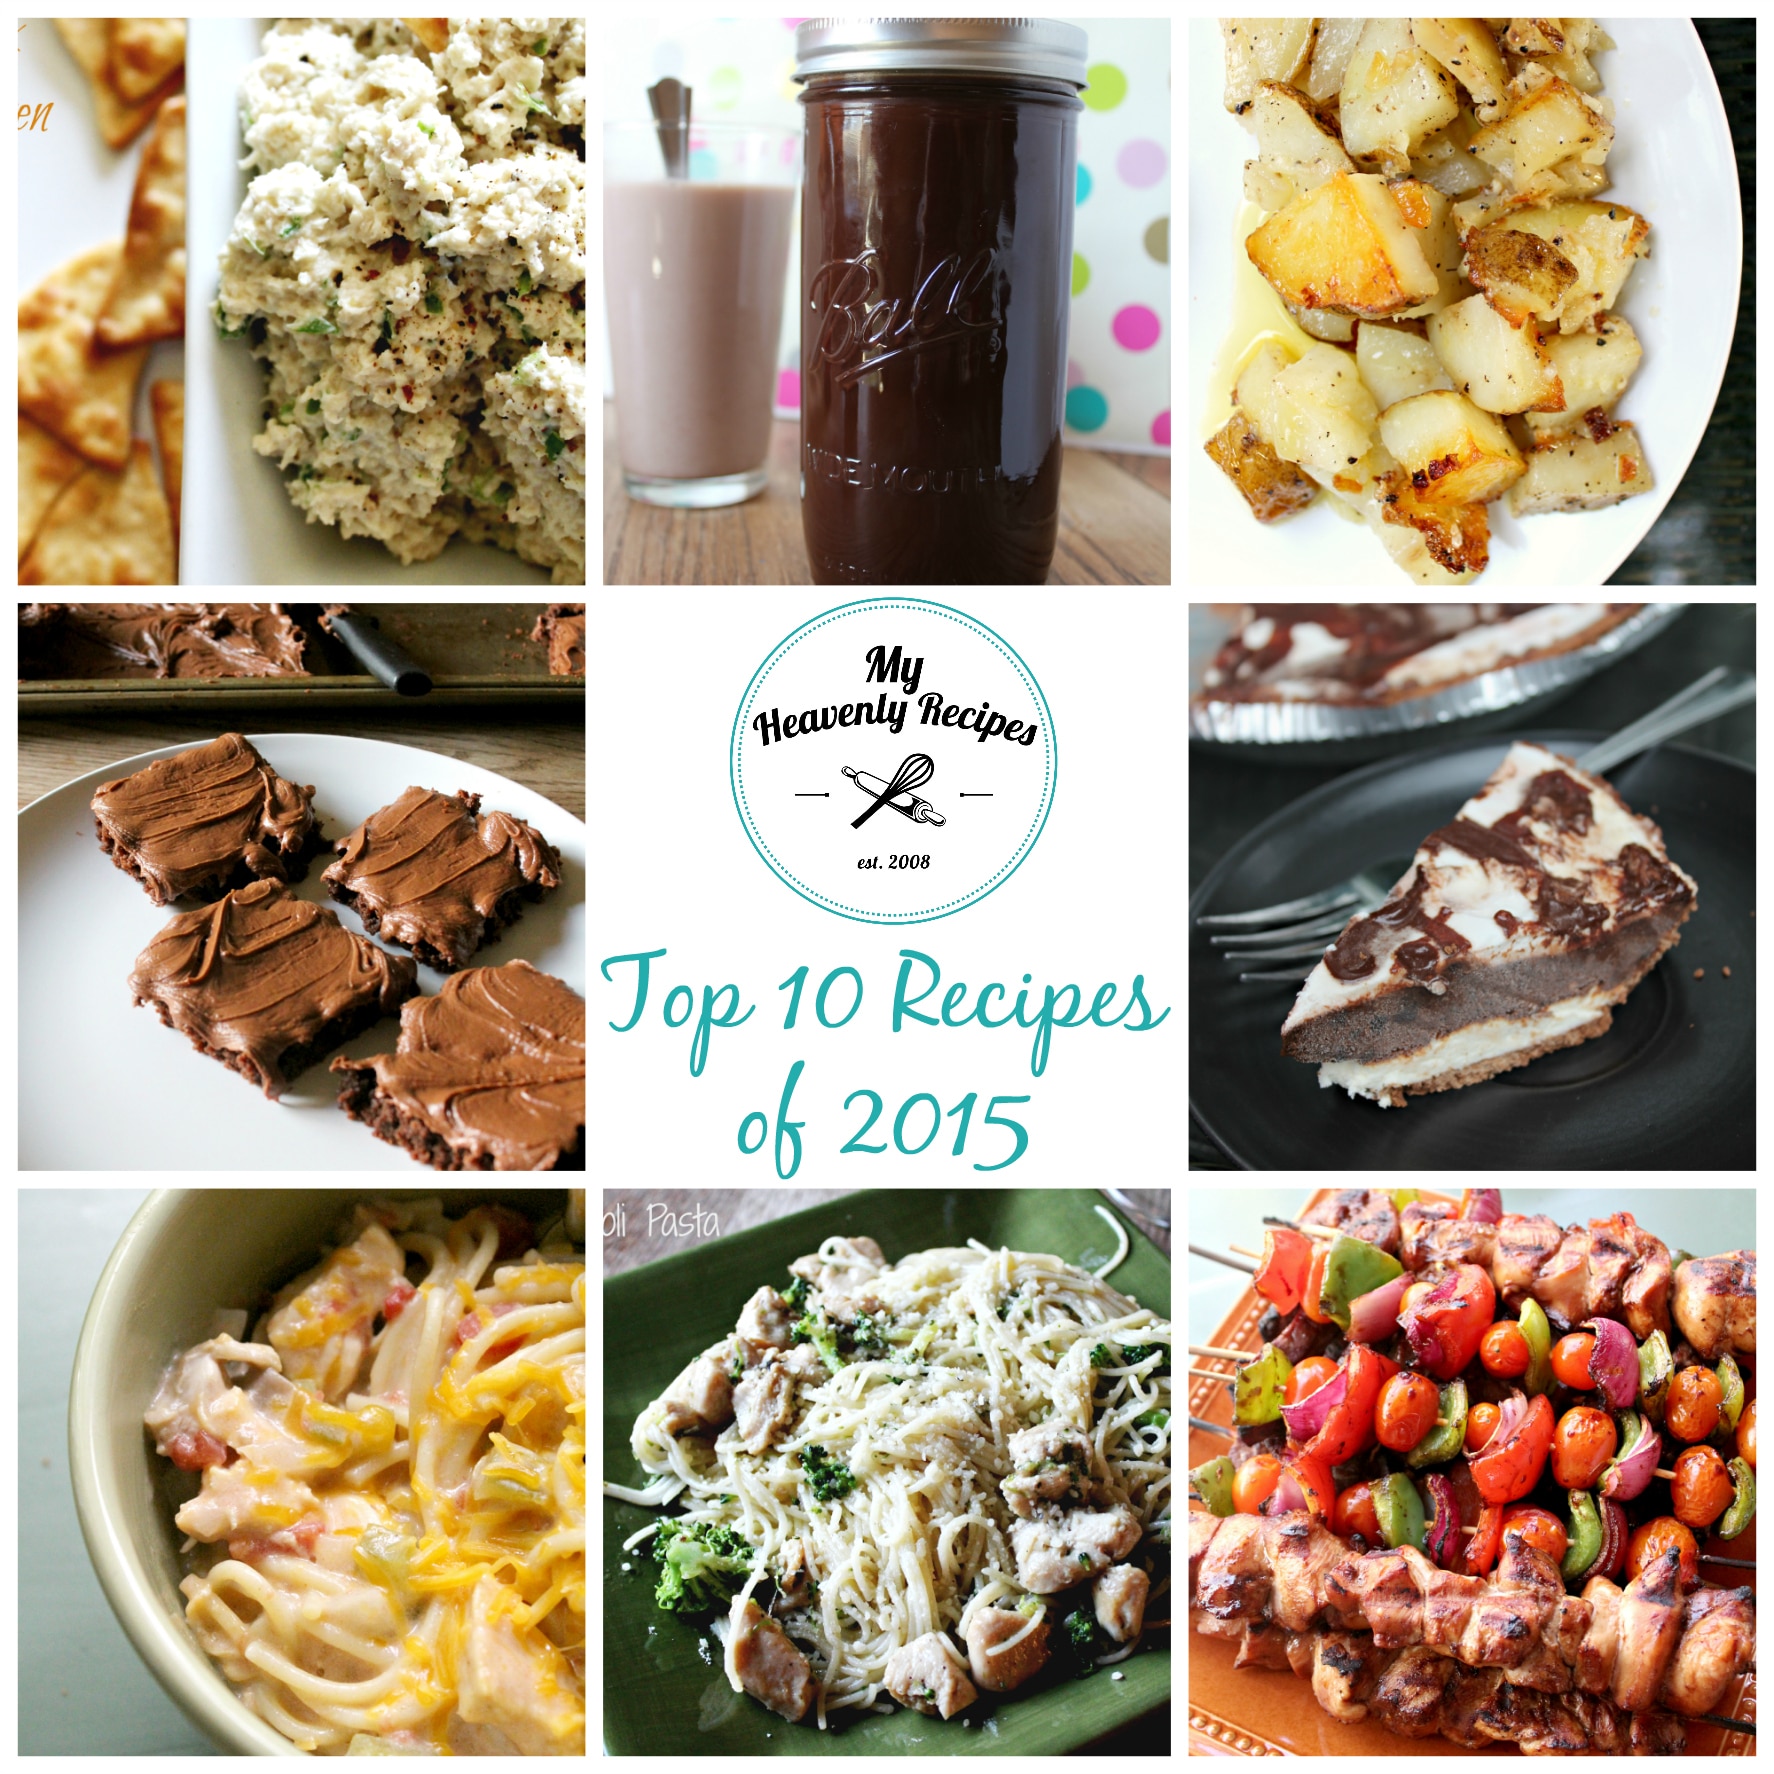 MHR'S Top 10 Recipes of 2015